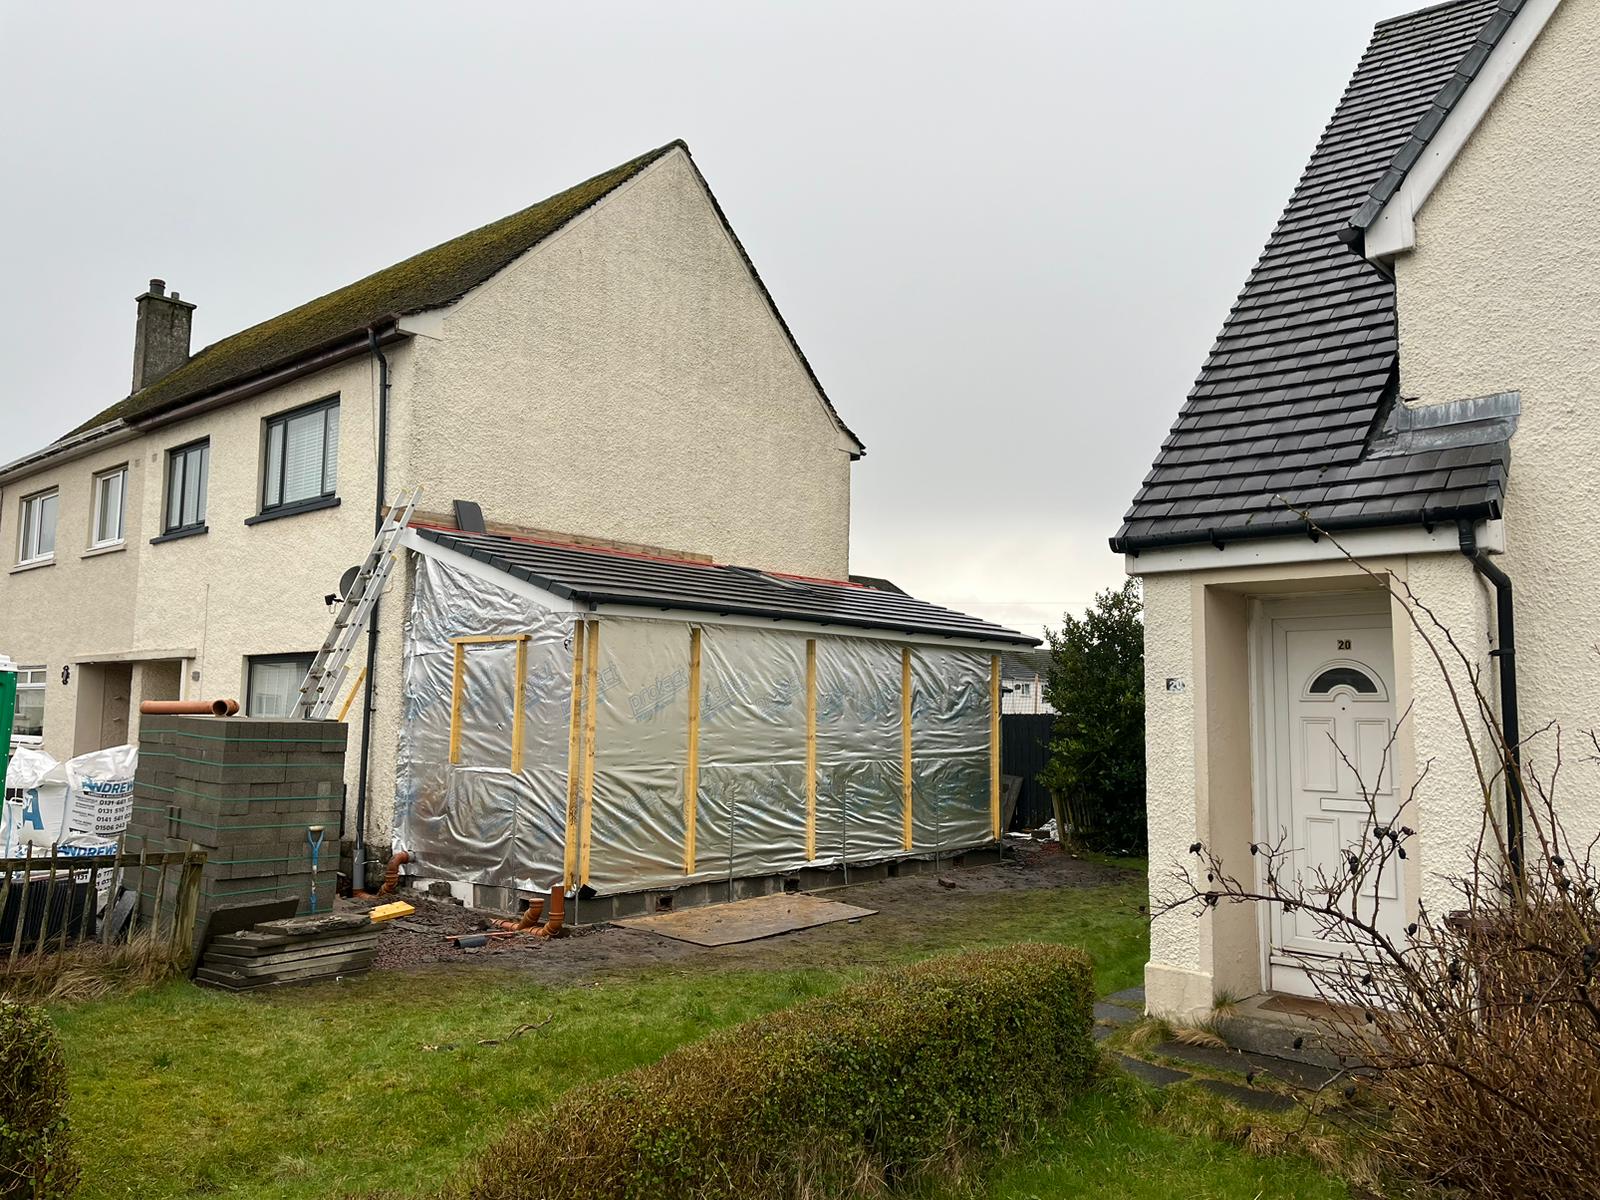 Construction company Cleland Joiners & Builders made an offer to do the full build extension of the home for free.